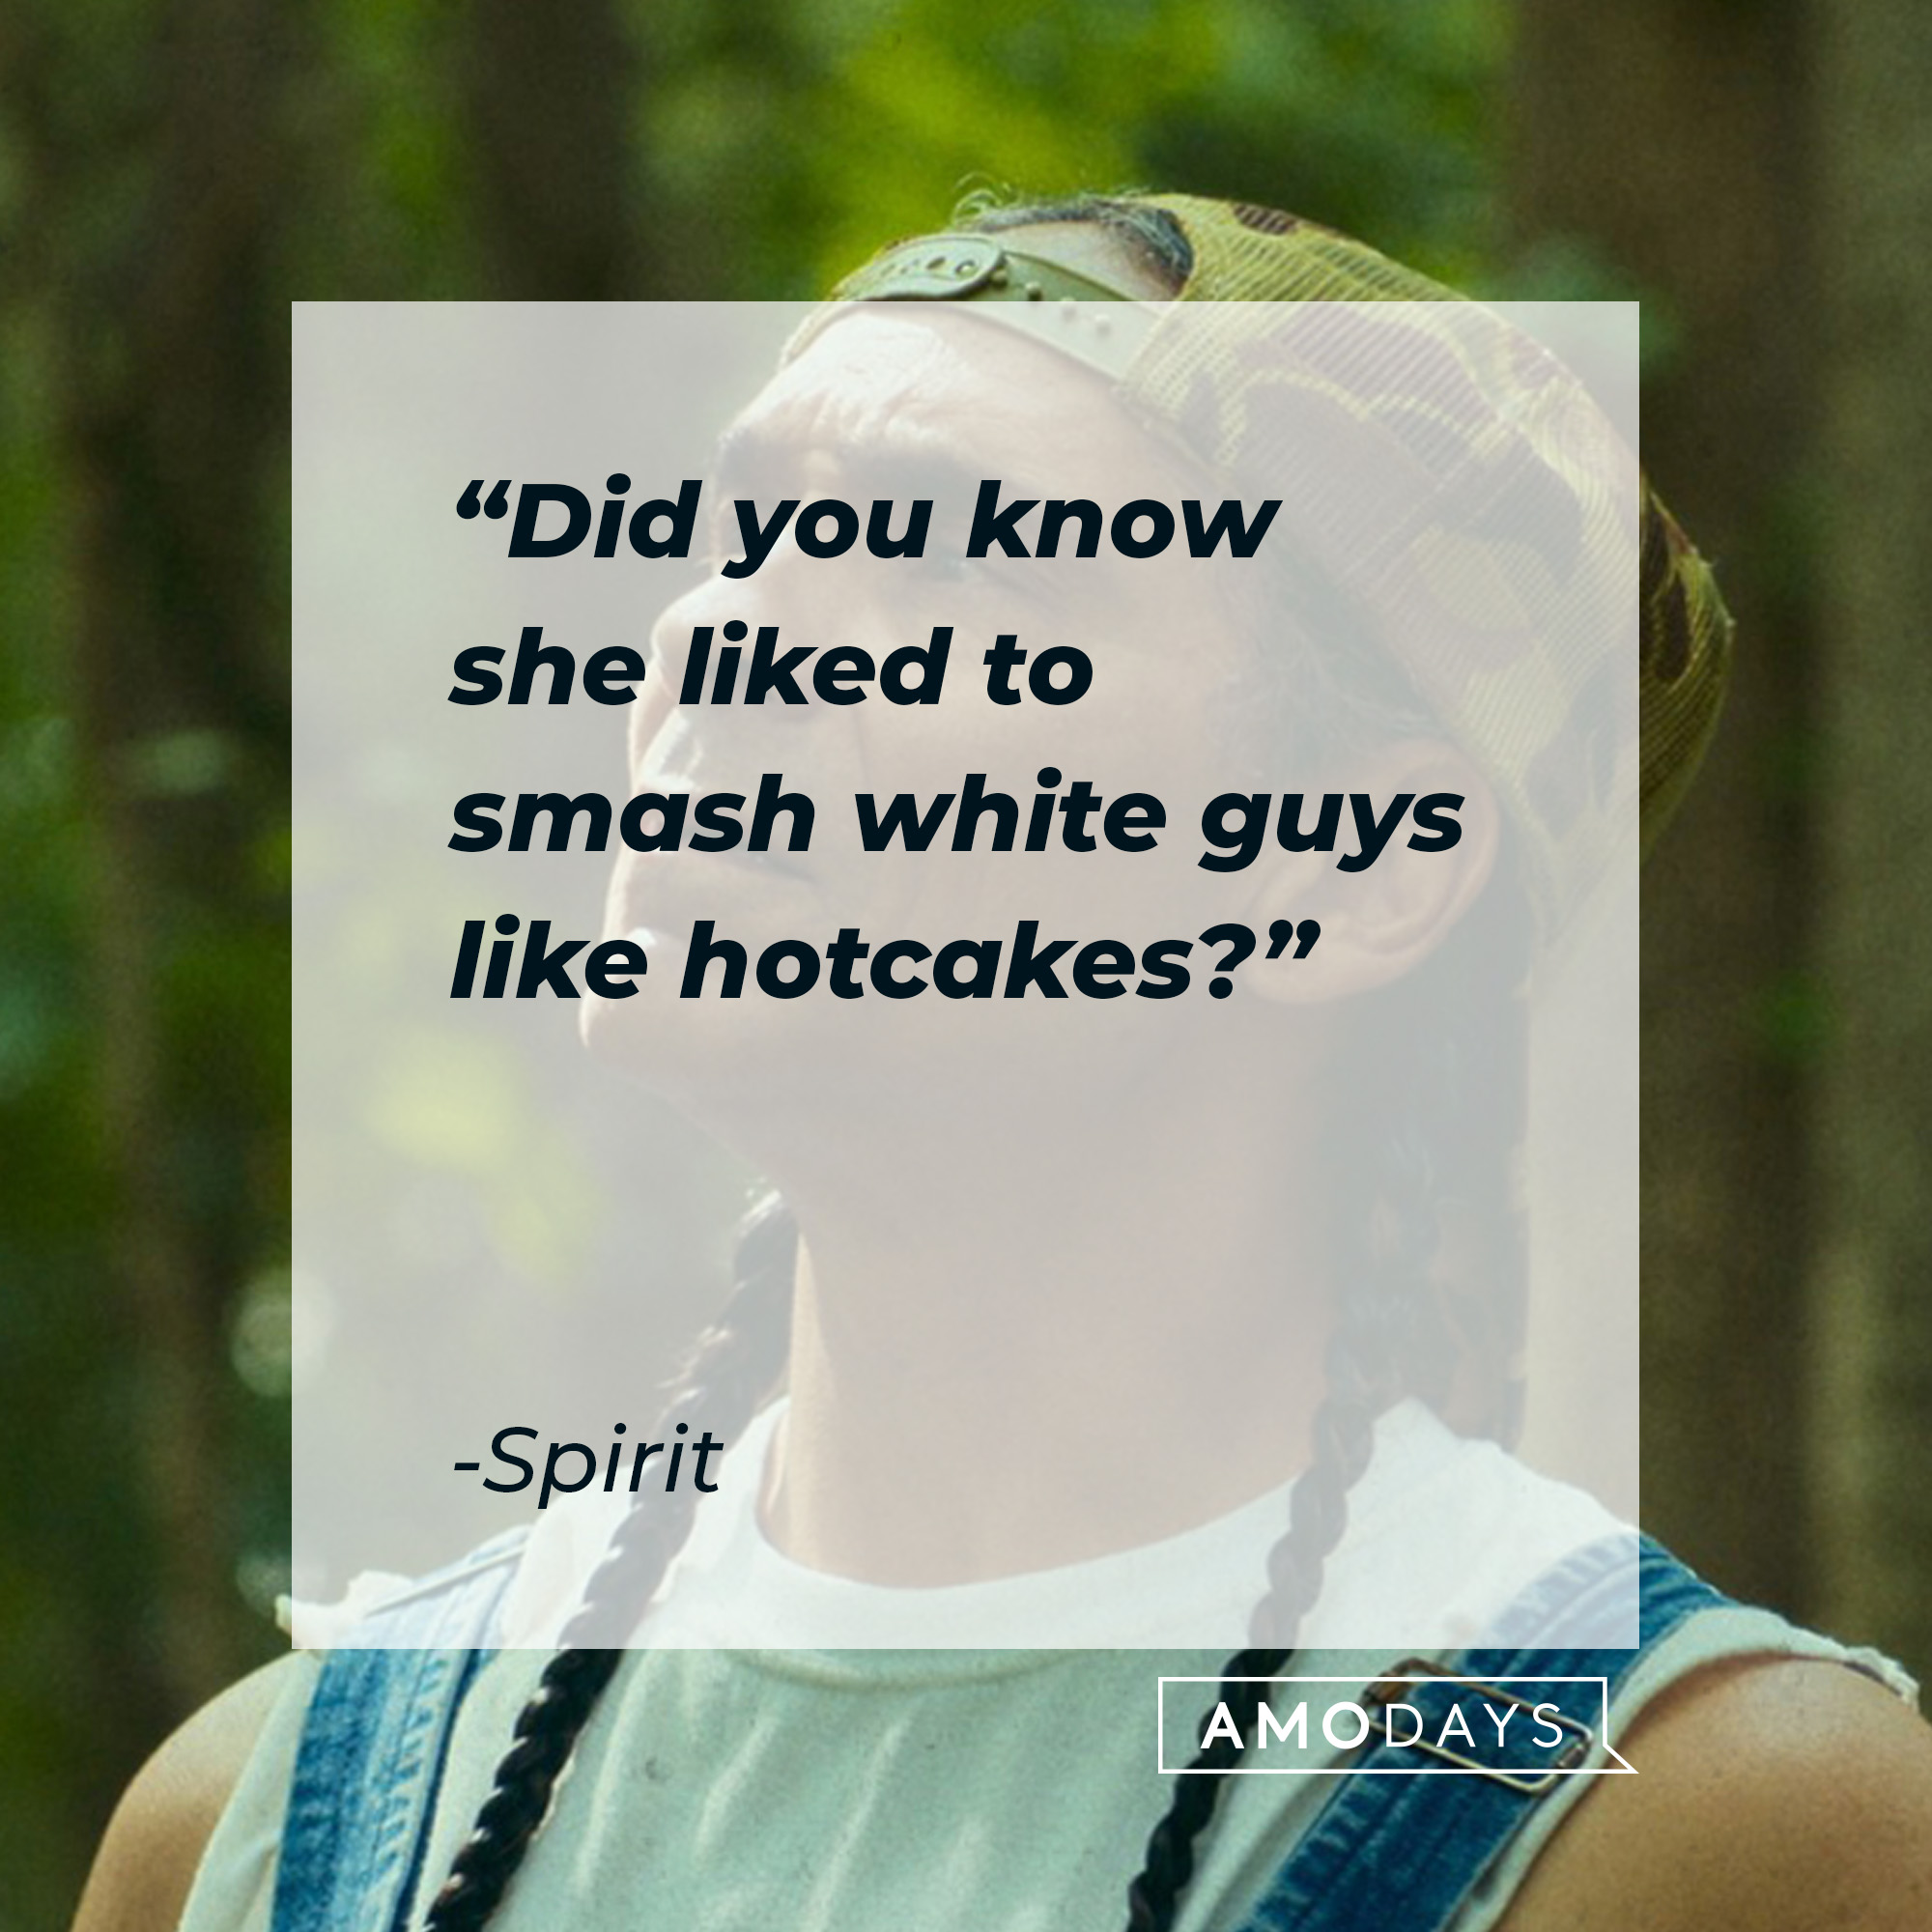 Spirit, with his quote: "Did you know she liked to smash white guys like hotcakes?" | Source: Facebook.com/RezDogsFX